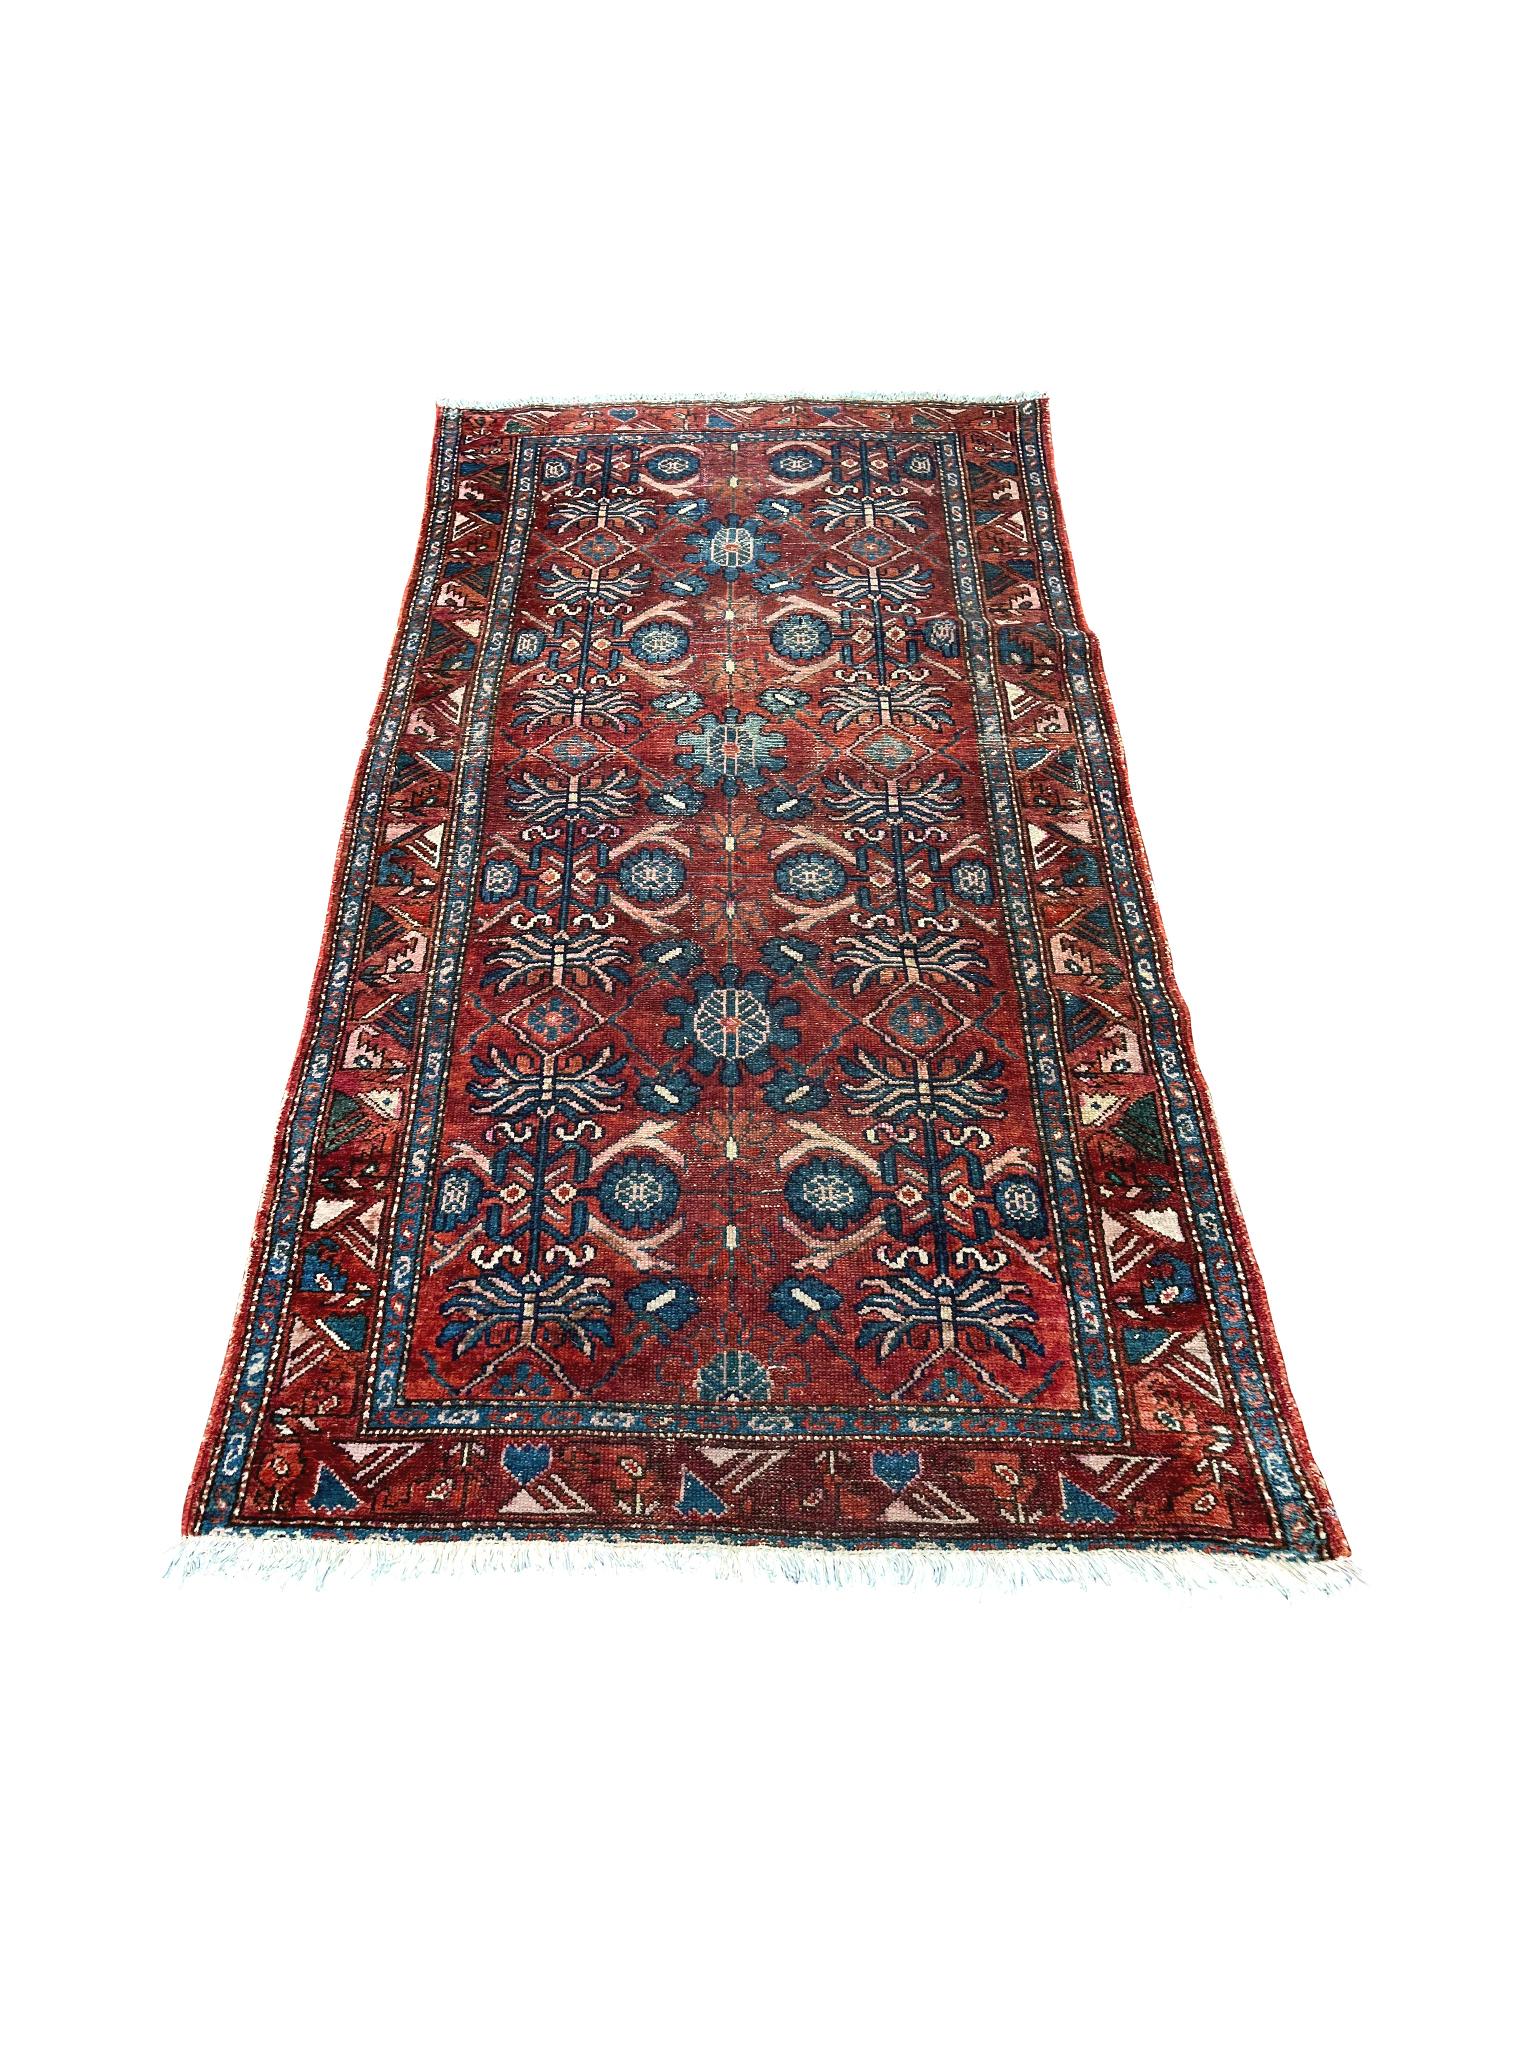 Hand-woven in the 1st quarter of the 20th Century, this beautifully aged Northwest Persian rug has a palette of red, blue, and ivory. The design centers 2 dark-blue floral columns in a red field surrounded by a series of borders of the same palette